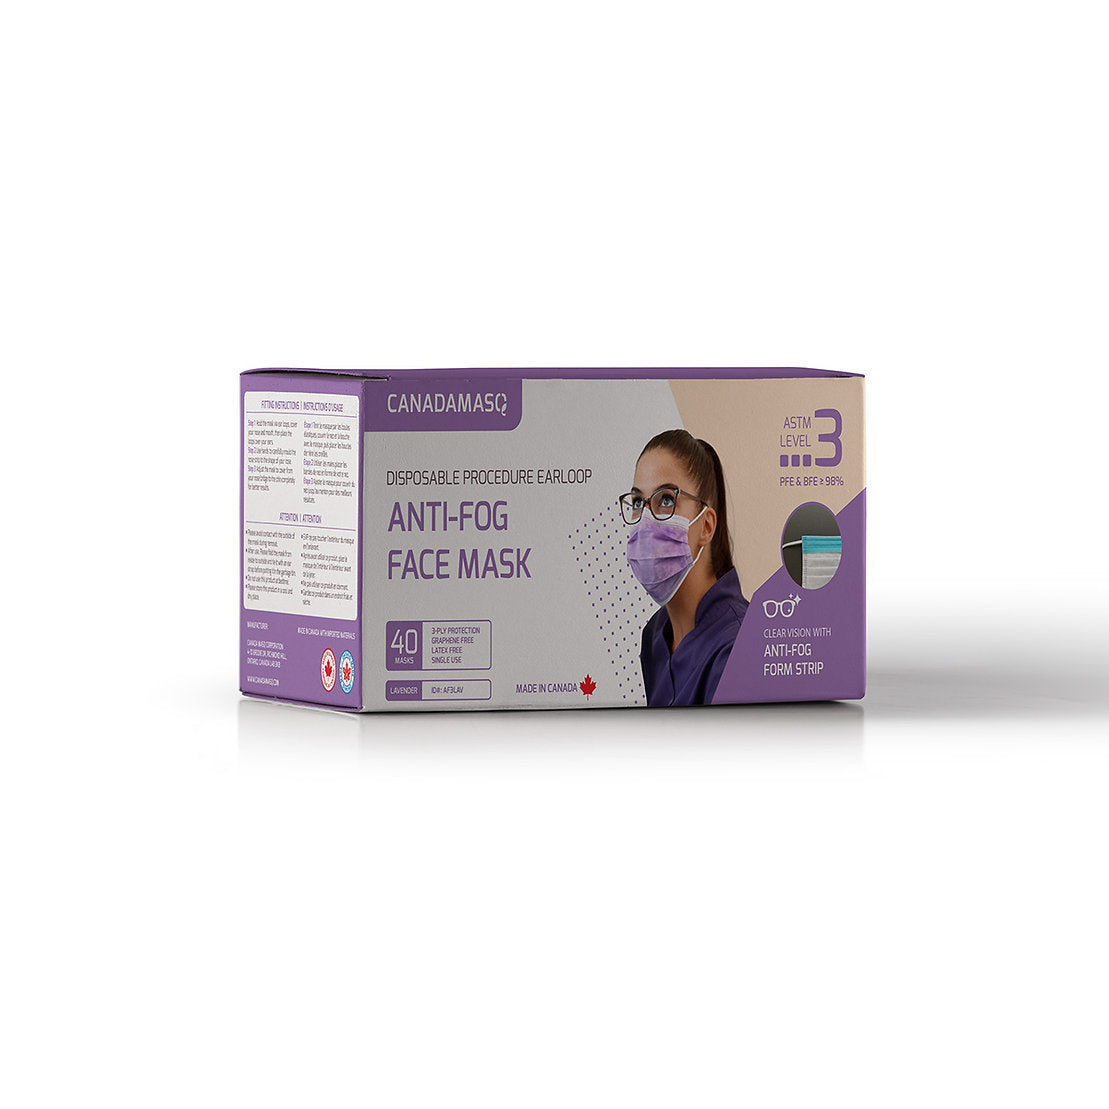 Box of Purple disposable face mask anti-fog level 3 3-ply